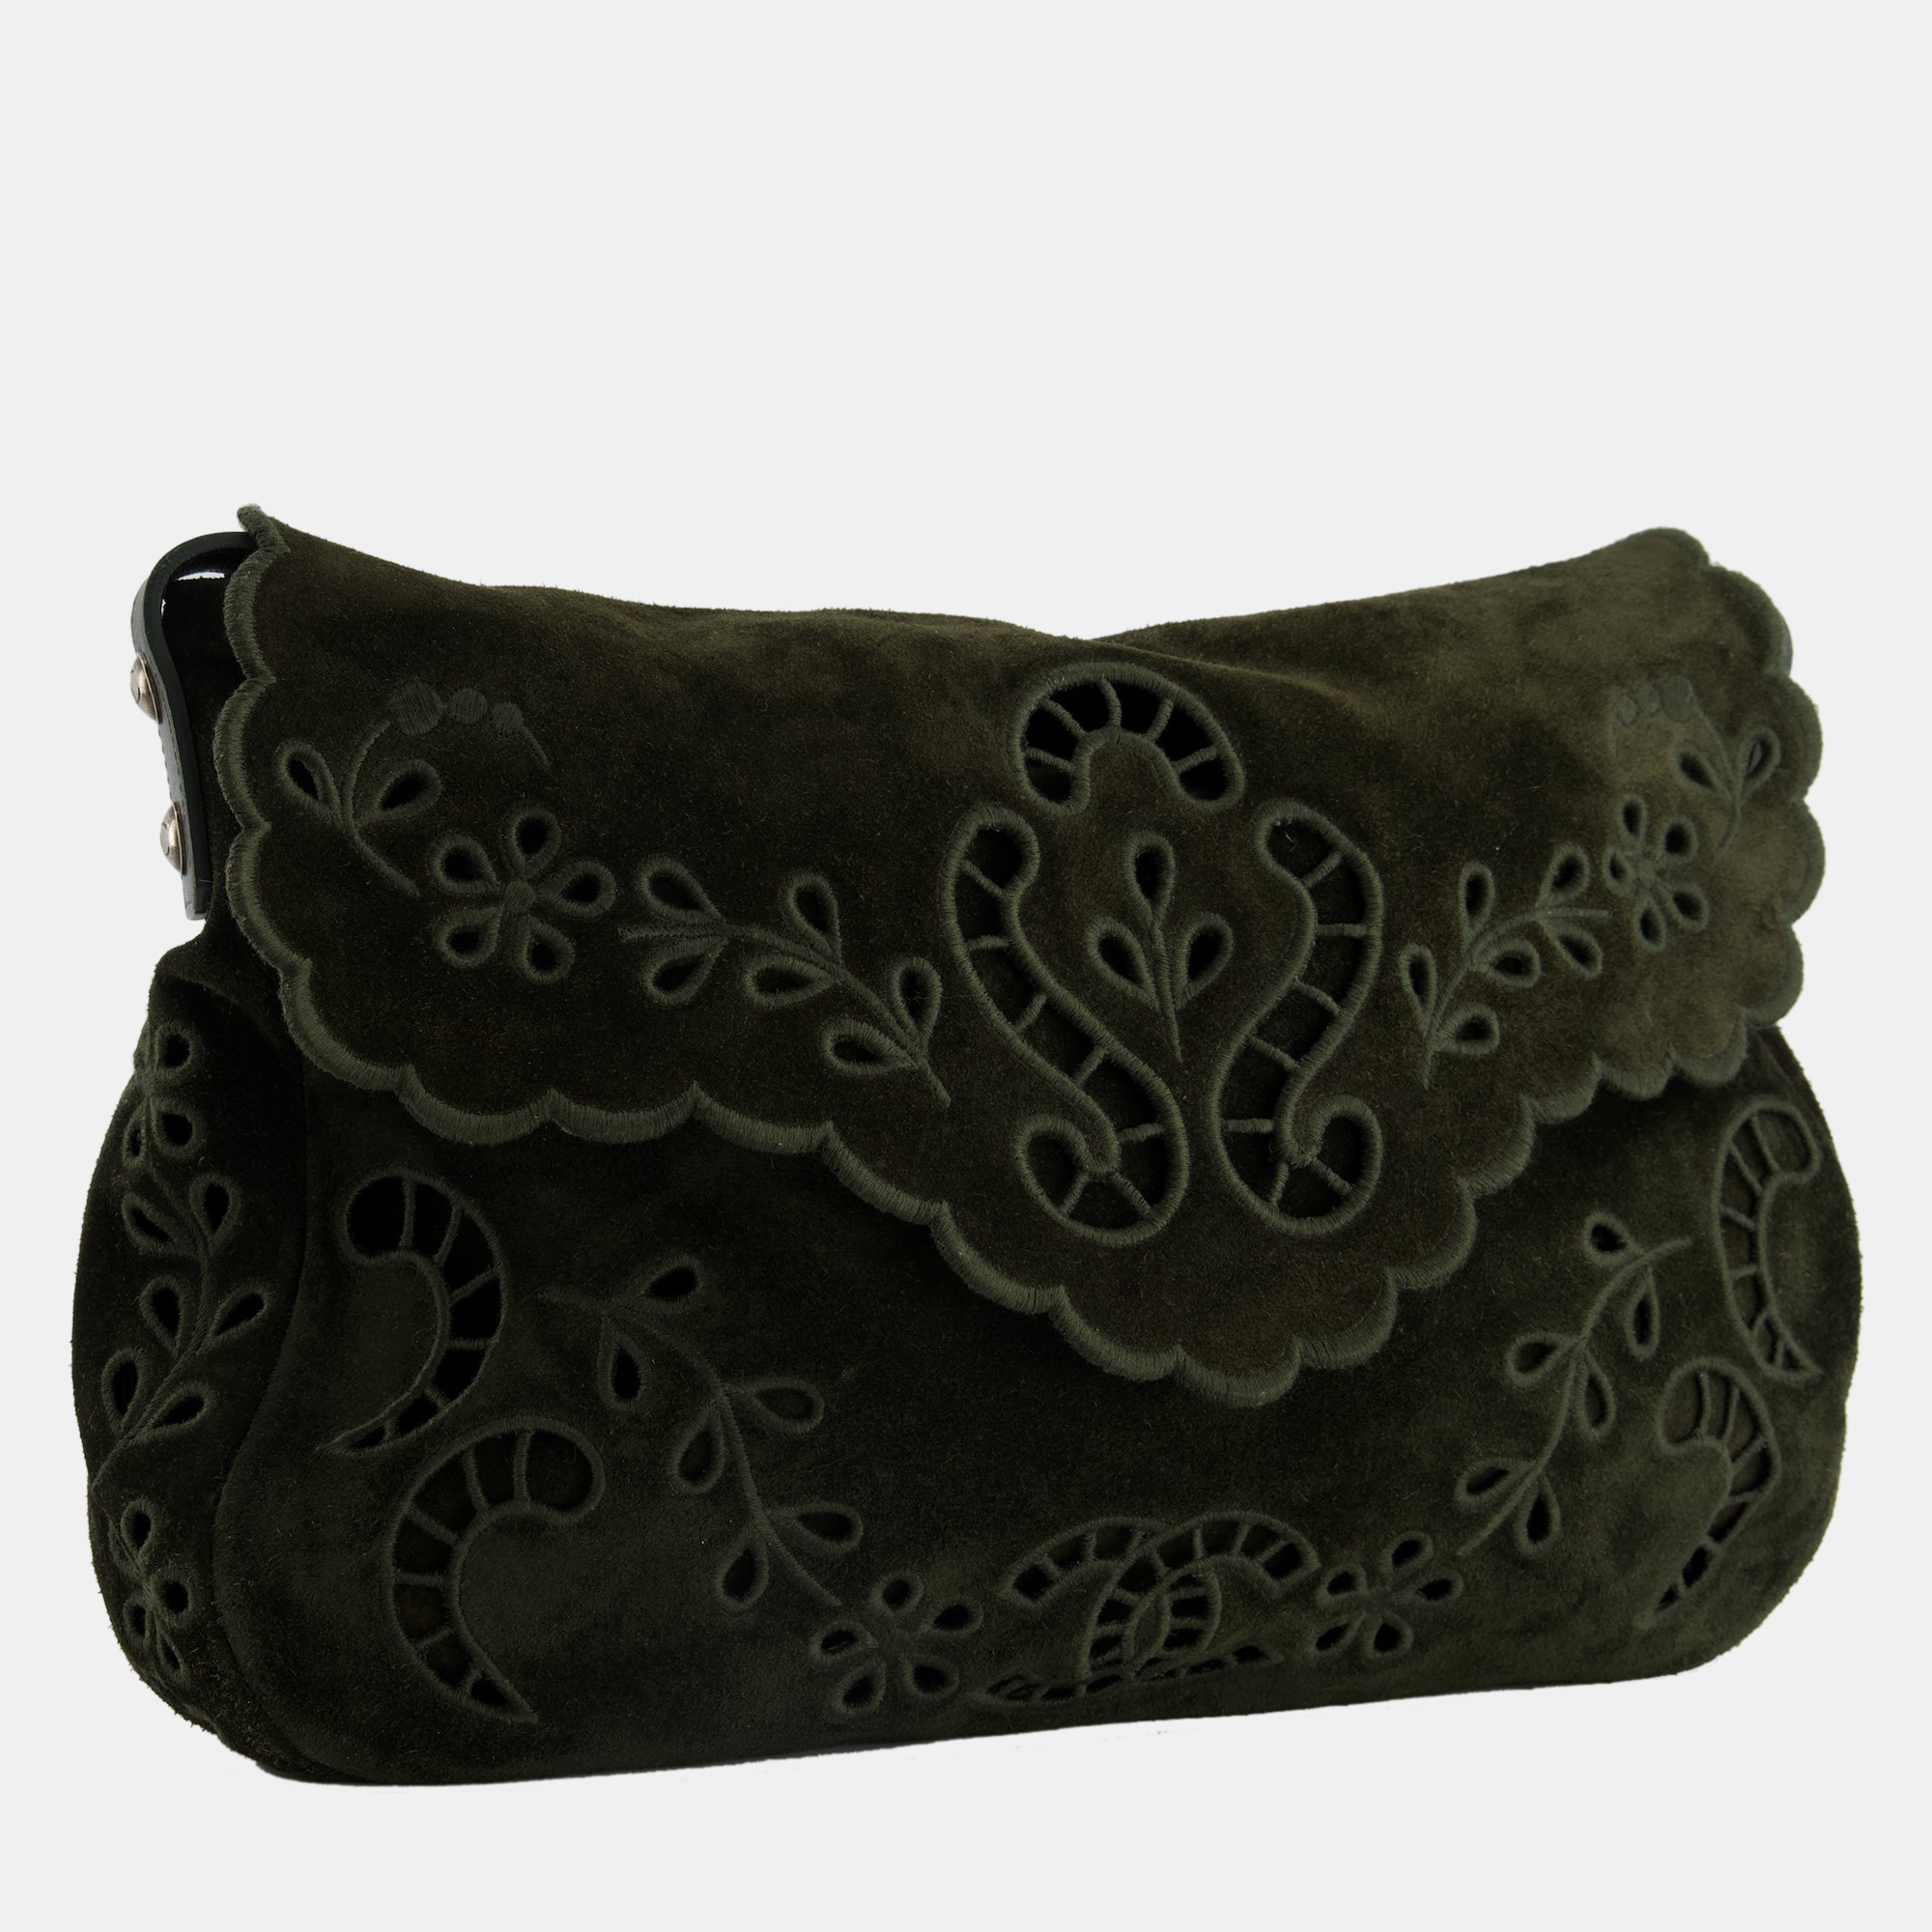 Chanel Khaki Suede Paisley Embroidered CC Messenger Bag With Ruthenium Hardware